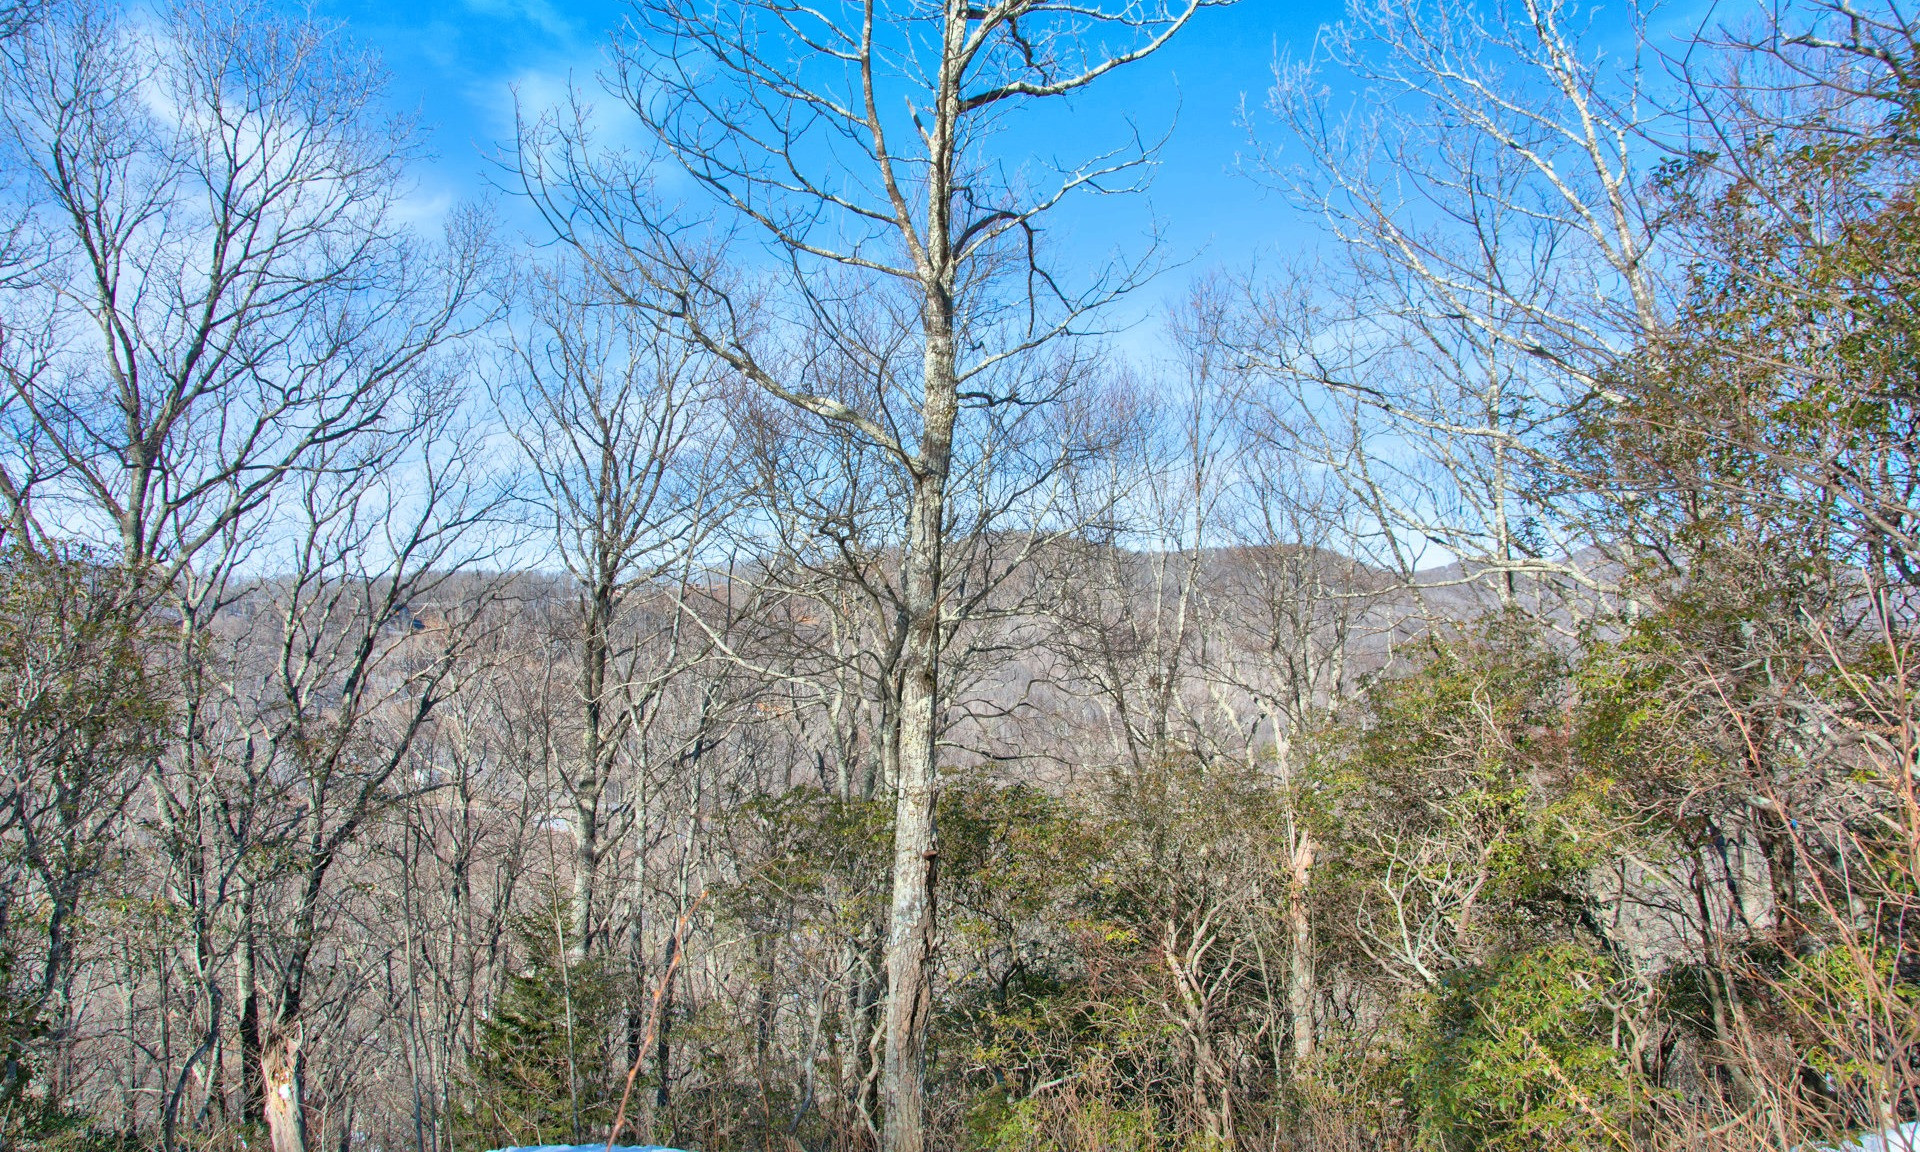 These lots are located at the end of Birdcall Lane with a small cul-de-sac in place. Featuring rock outcroppings, mountain laurel and seasonal mountain views, this would make a beautiful site for a mountain home in the popular Todd address.